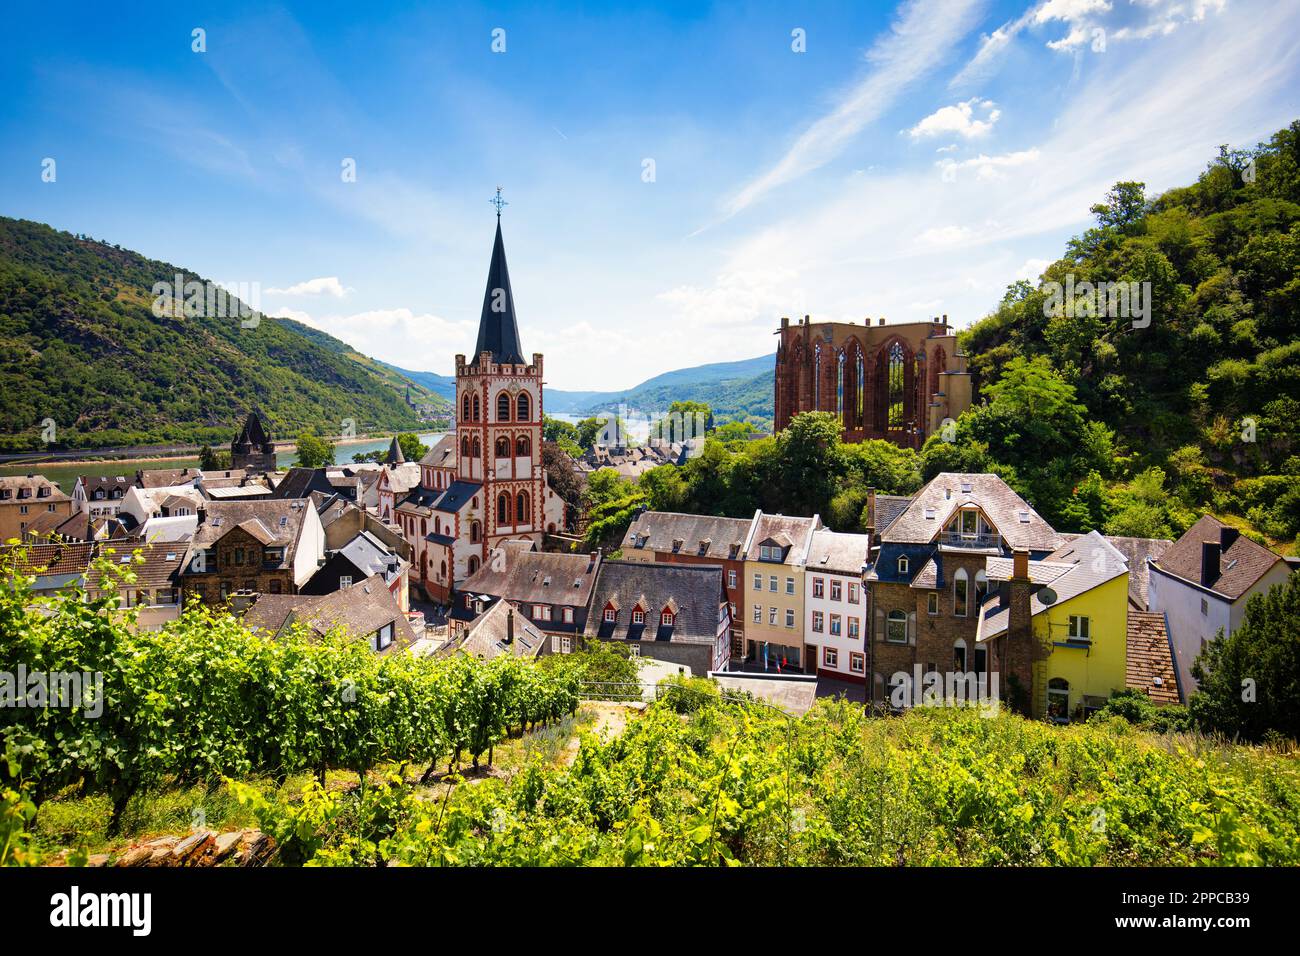 Bacharach panoramic view. Bacharach is a small town in Rhine valley in Rhineland-Palatinate, Germany. Bacharach is a small town in Rhine valley in Rhi Stock Photo